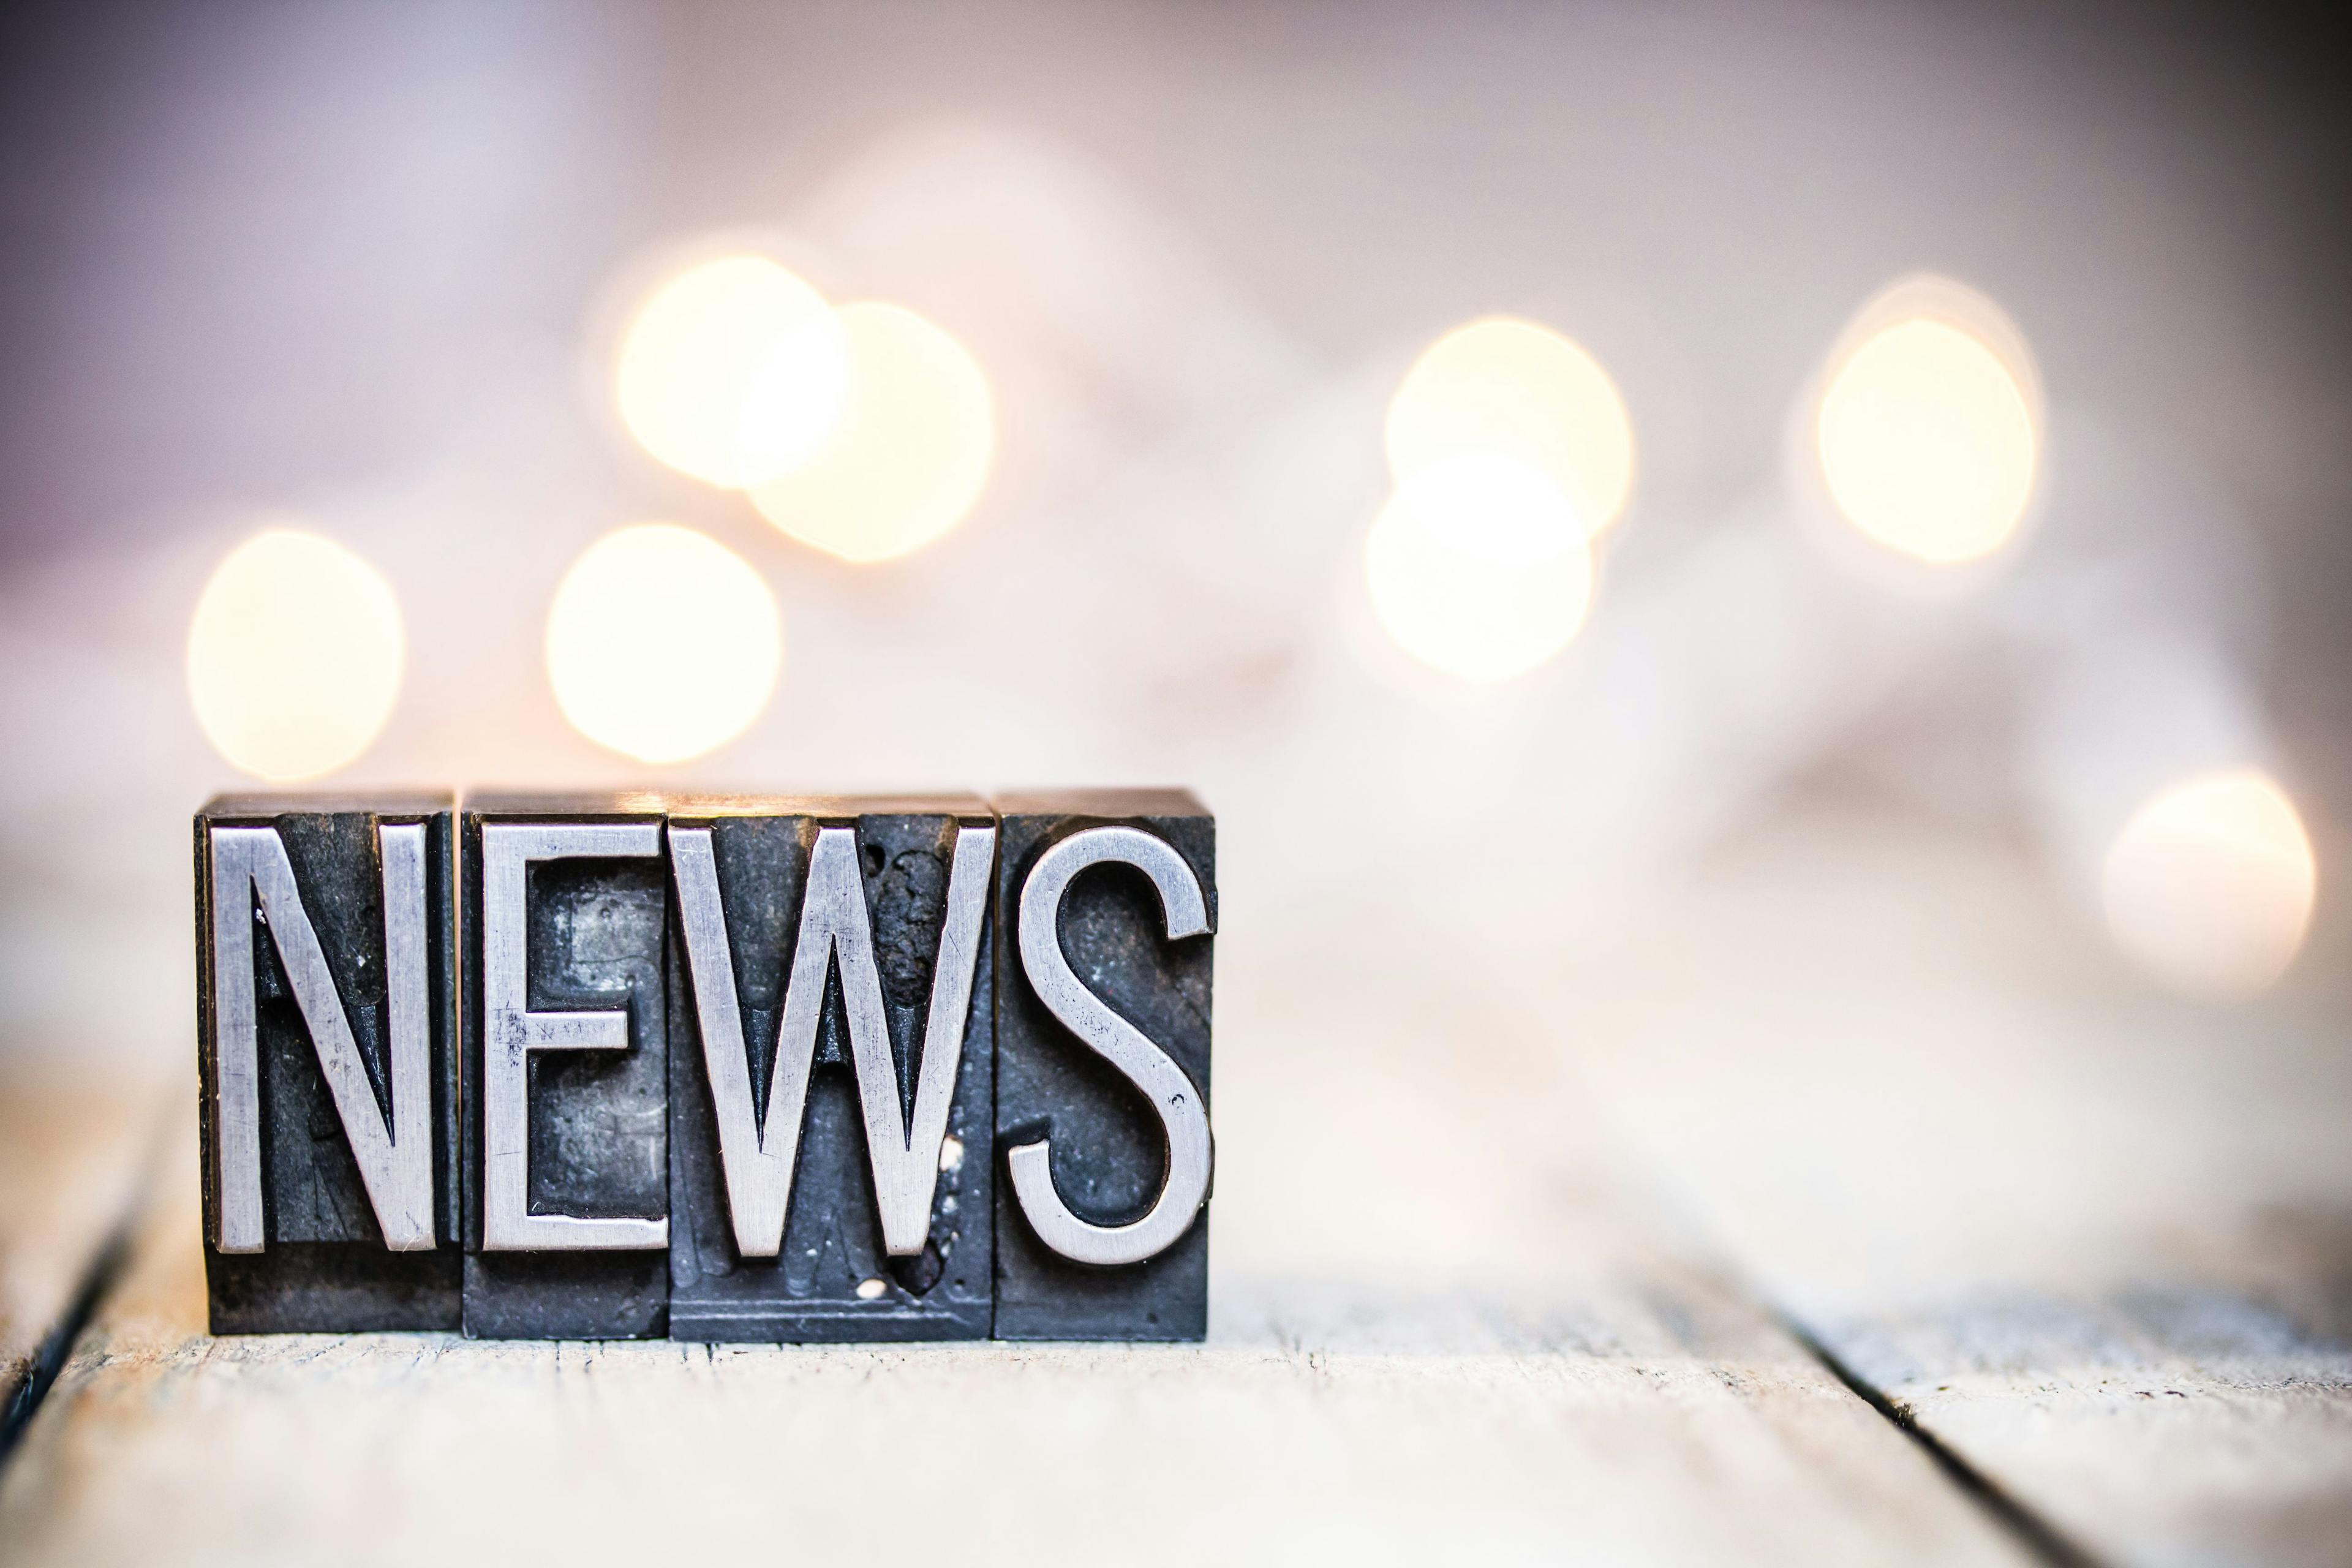 News wrap-up: This week's headlines, plus creating change within the profession